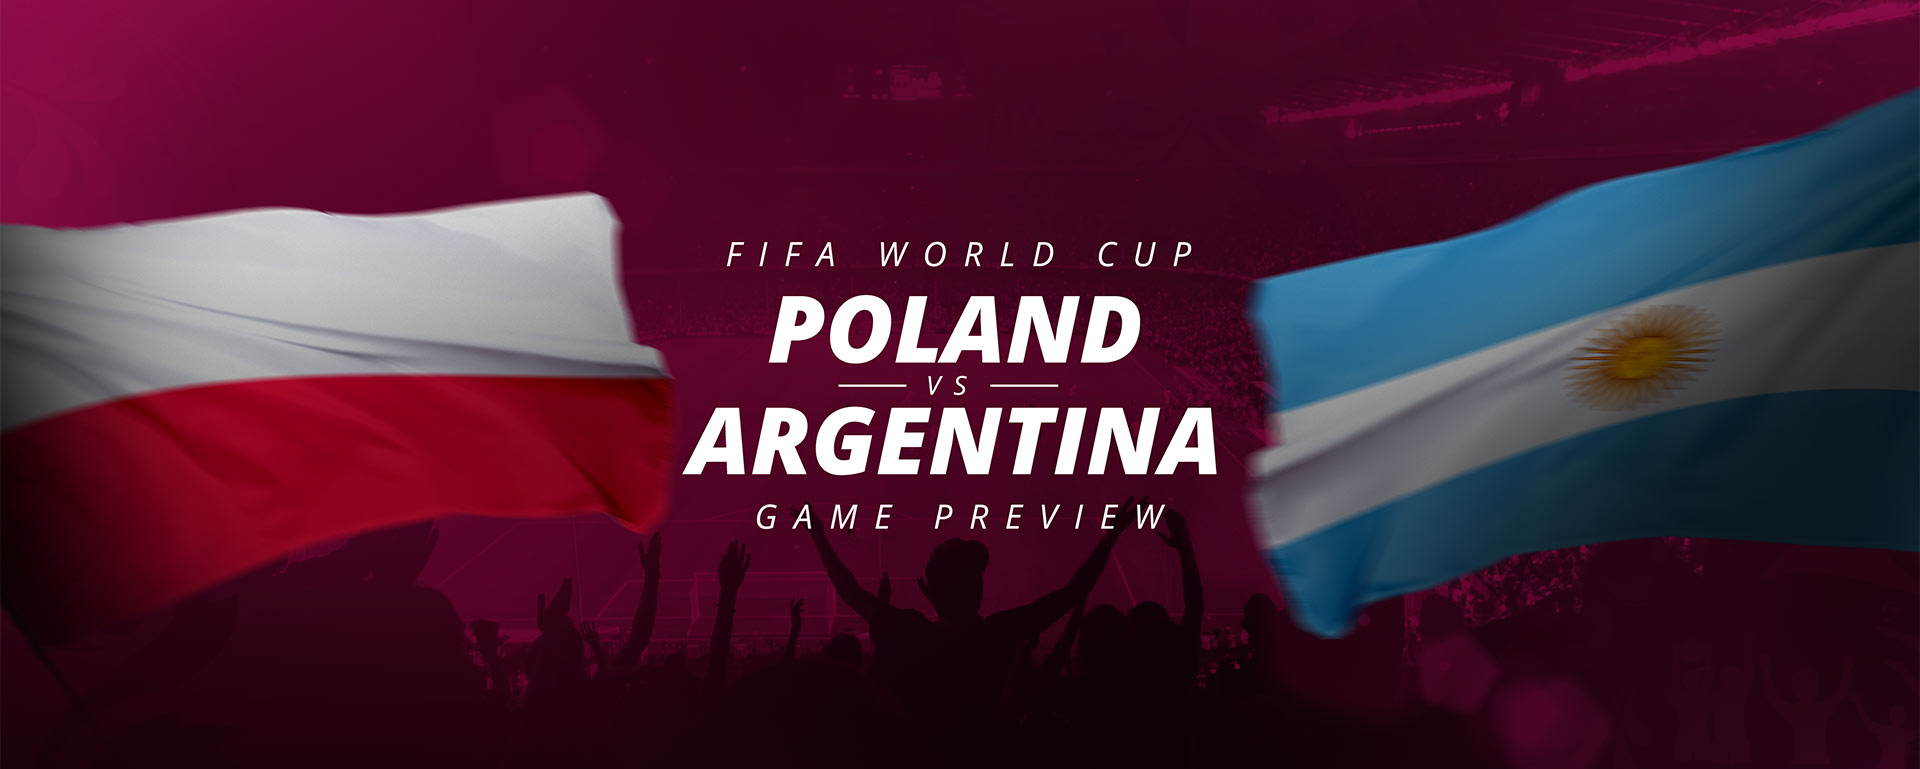 FIFA WORLD CUP: POLAND V ARGENTINA – GAME PREVIEW